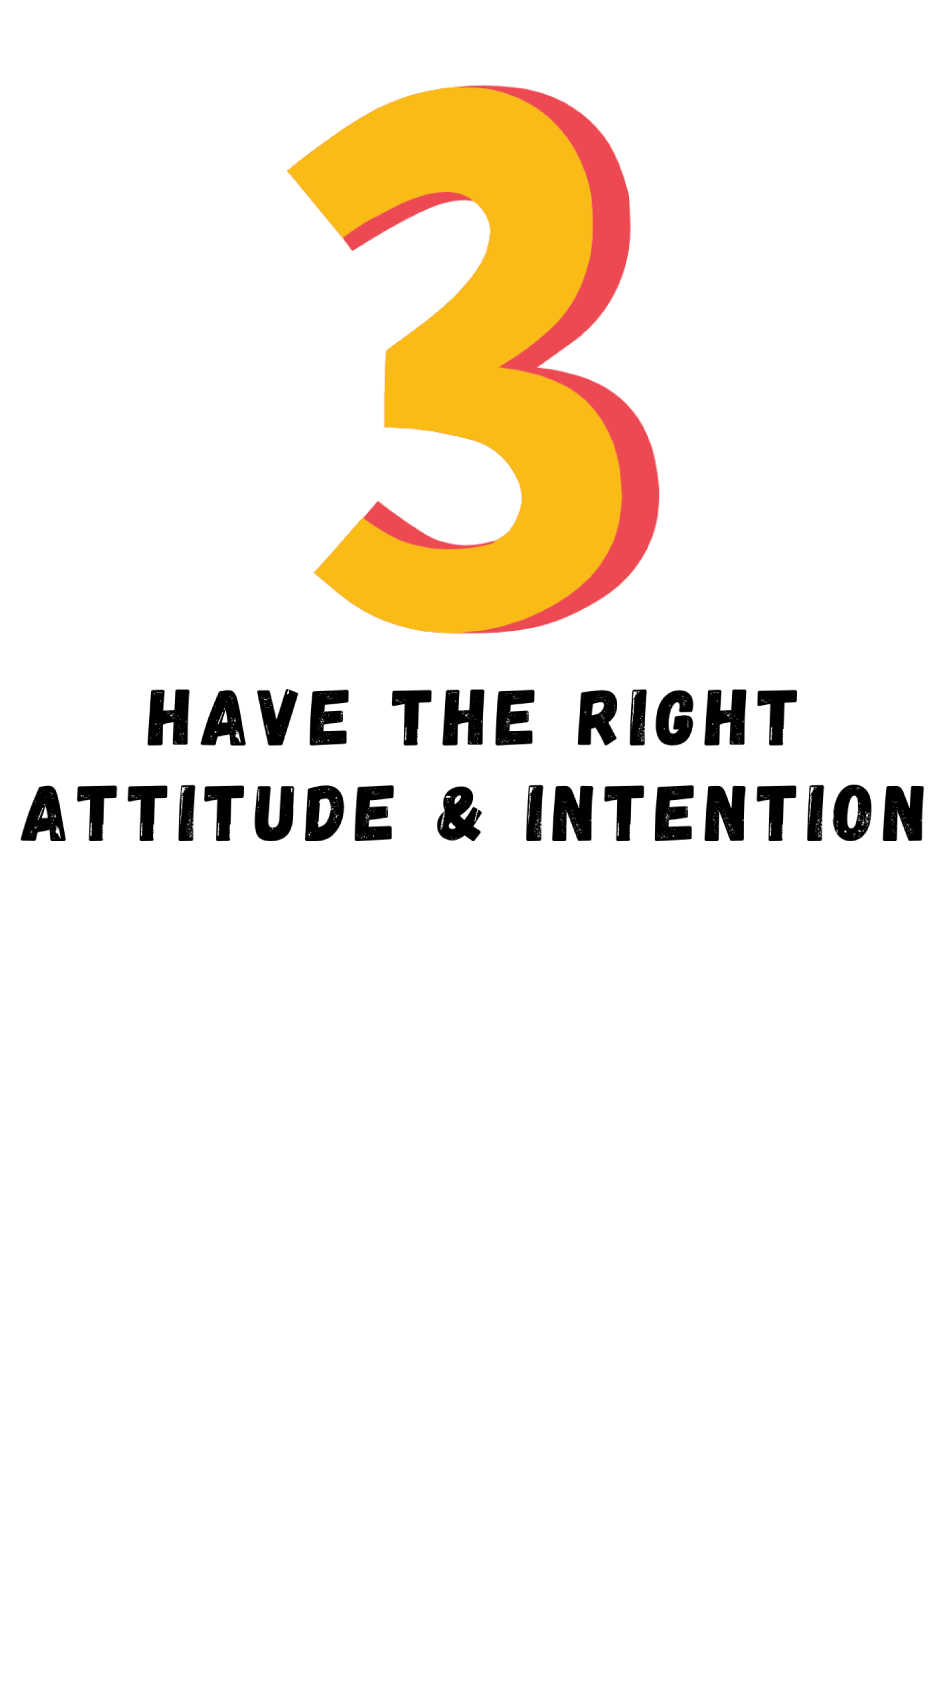 3. Have the Right Attitude and Intention